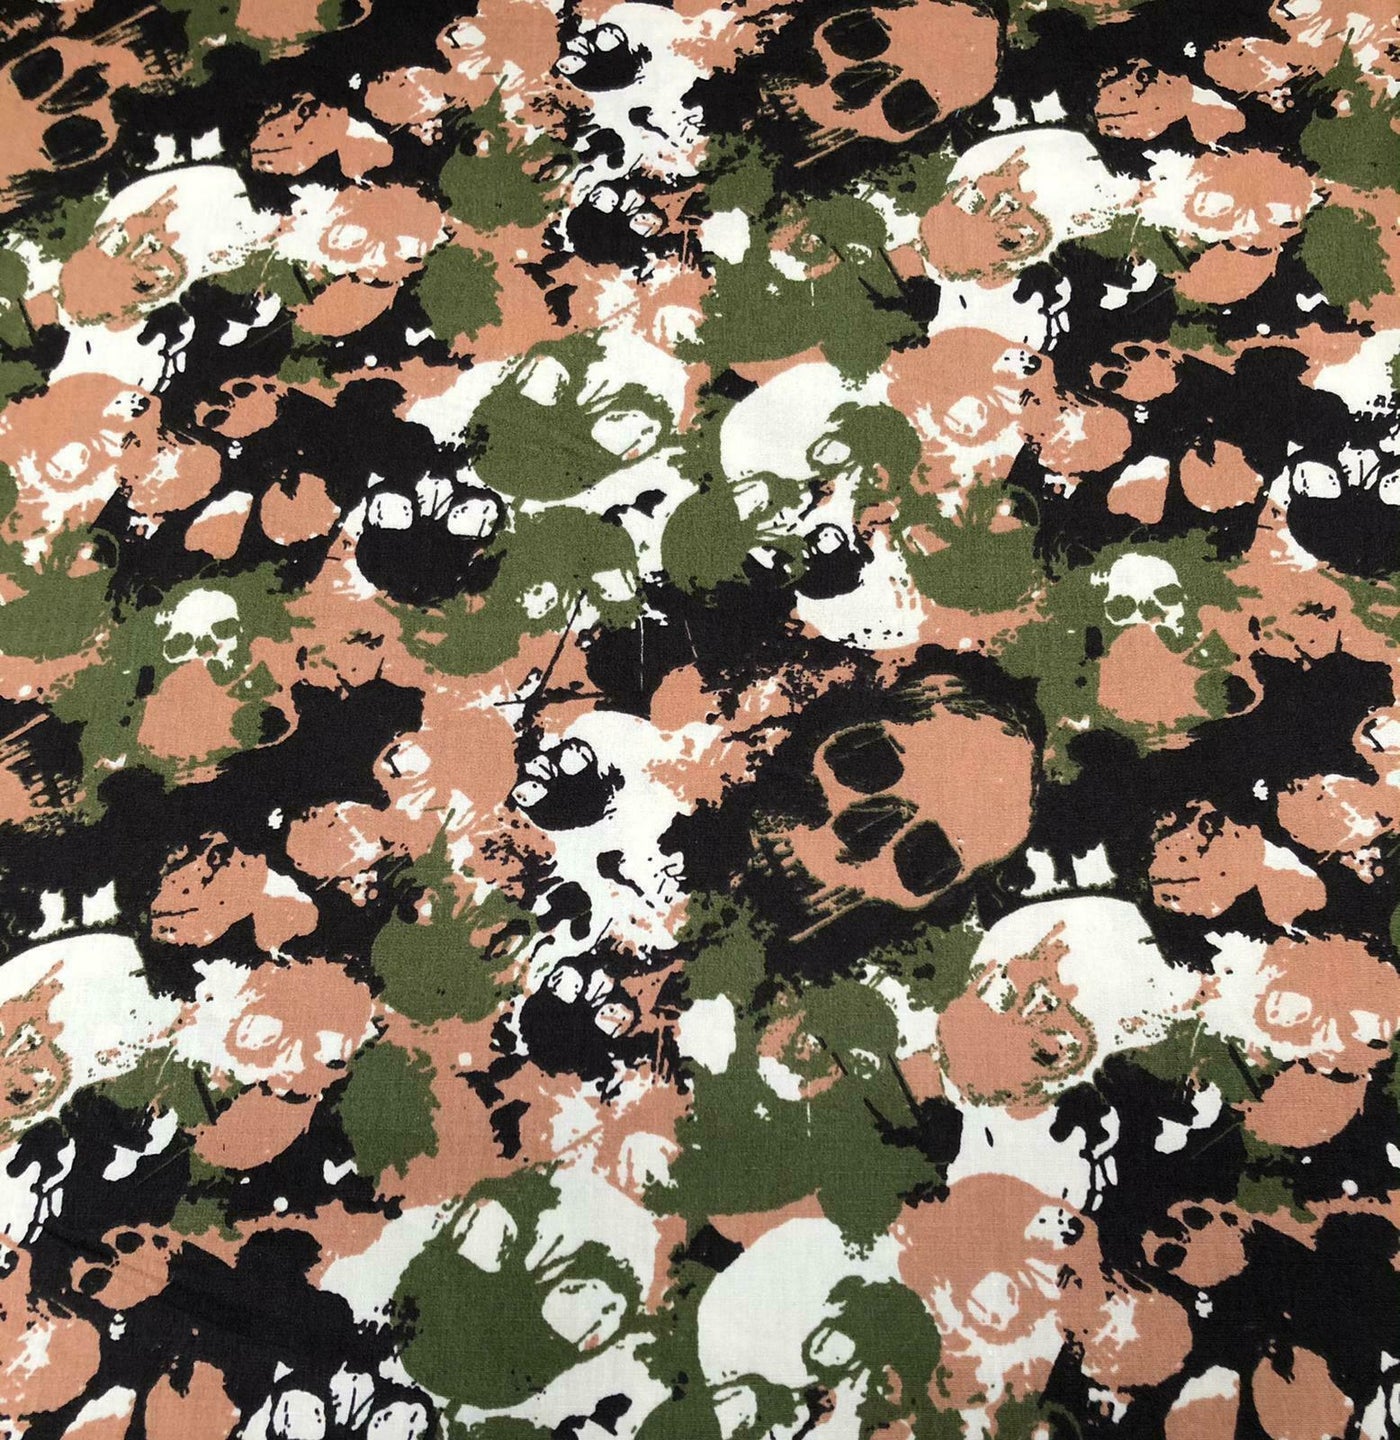 Camouflage Skull - Rose & Hubble - 100% Cotton Fabric